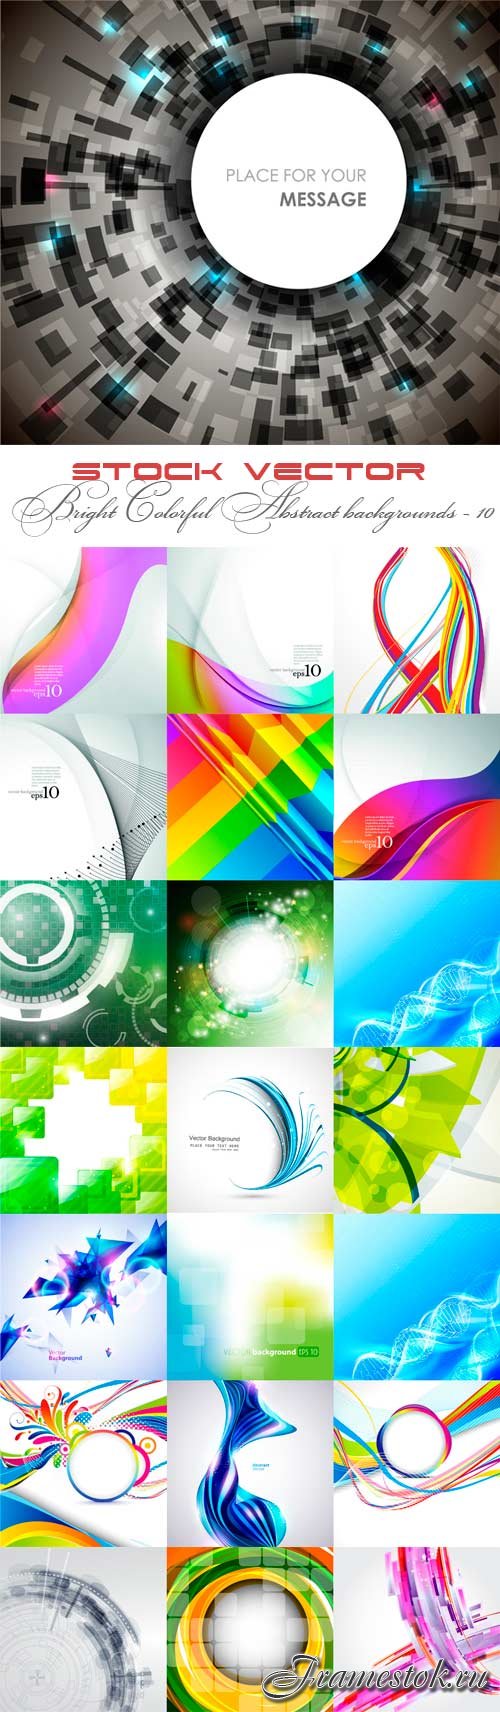 Bright colorful abstract backgrounds vector - 10